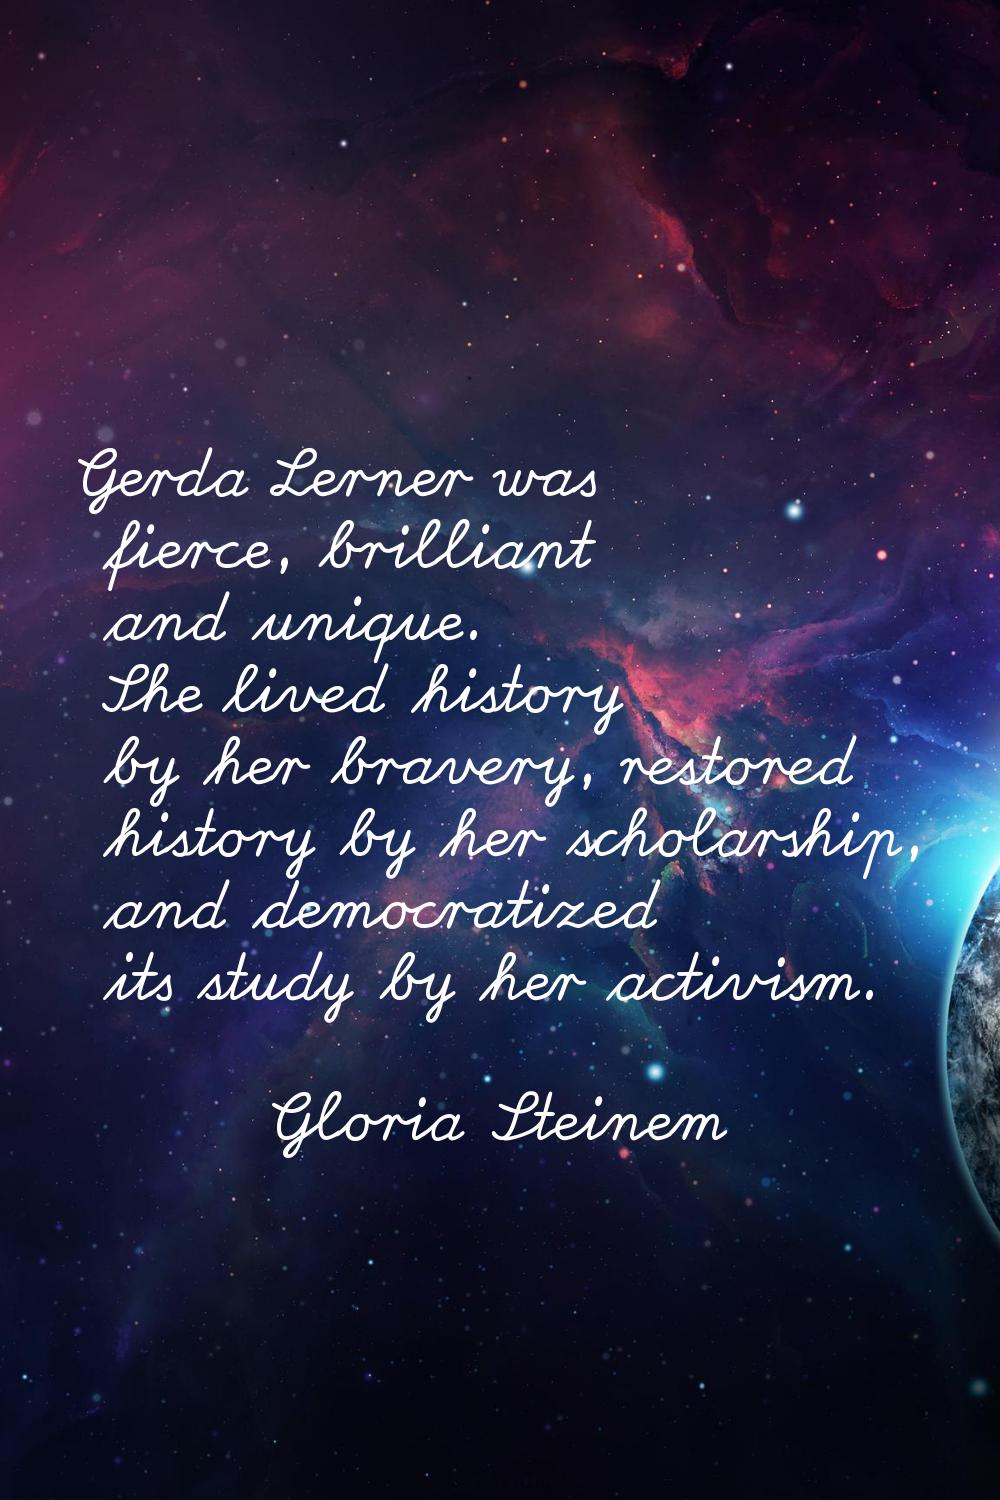 Gerda Lerner was fierce, brilliant and unique. She lived history by her bravery, restored history b